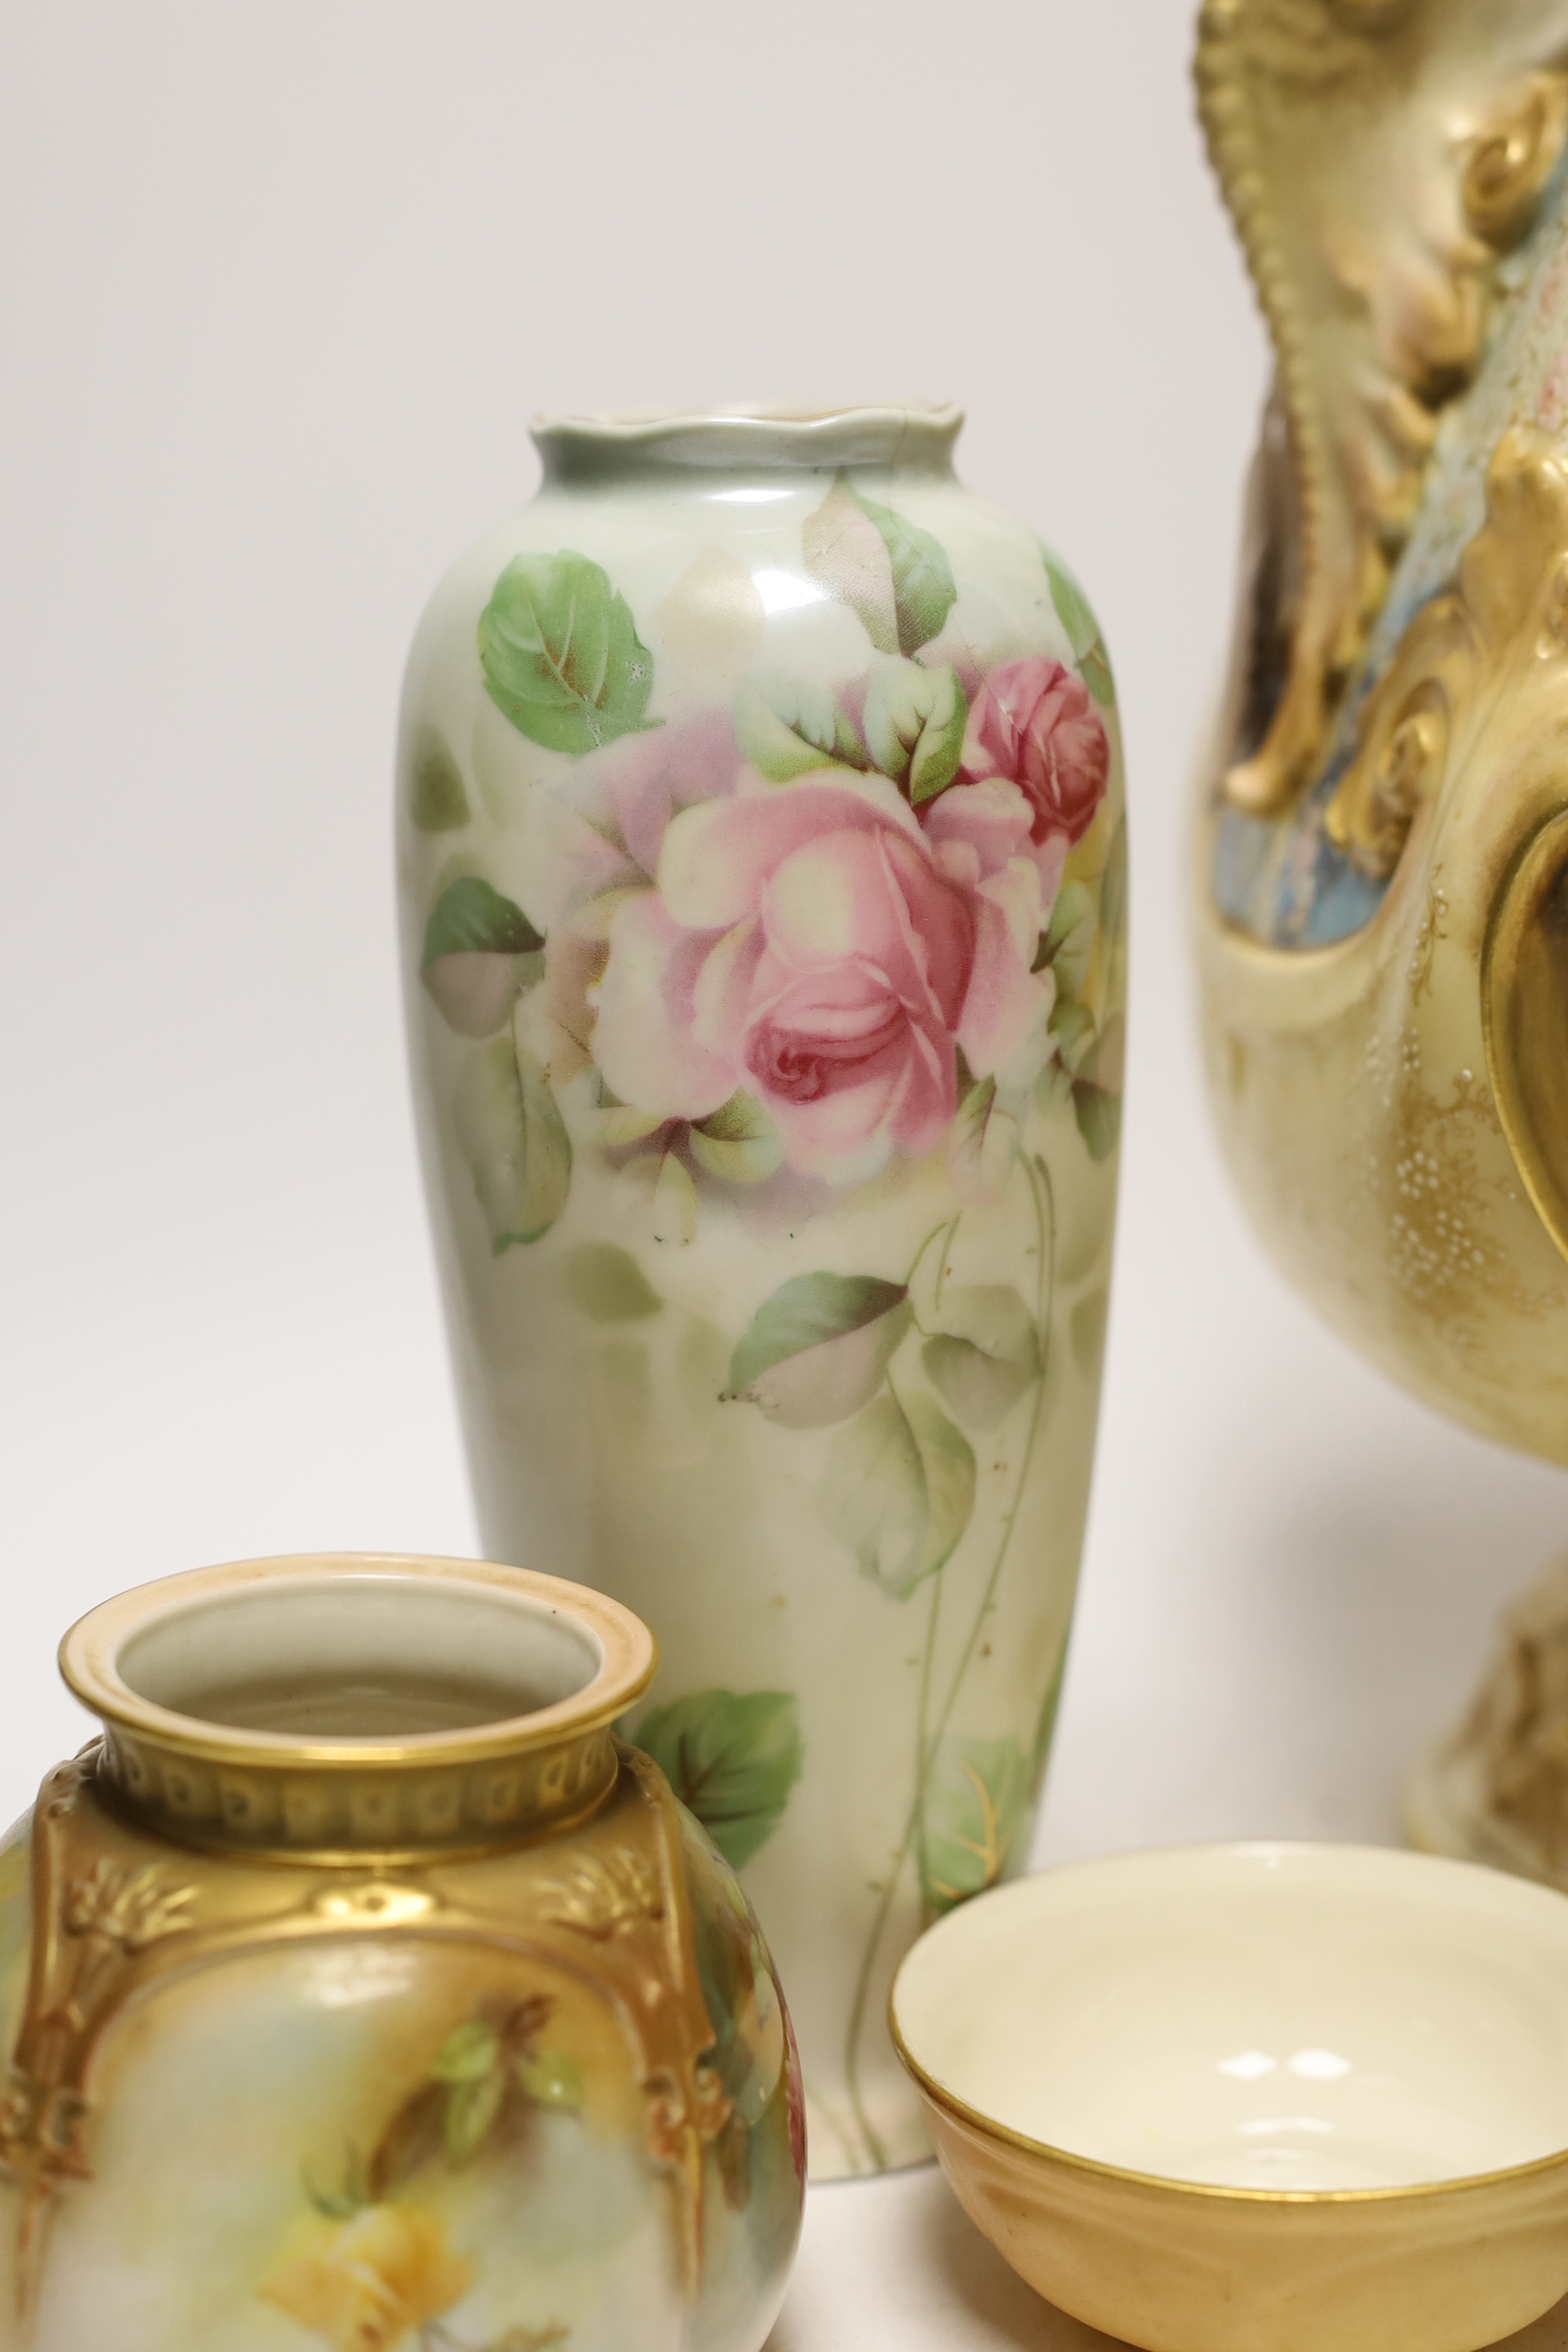 A large Doulton Burslem vase, c.1900 possibly made for Exhibition, a similar lobed vase, a Royal Worcester pot and dish and other ceramics, largest 51cm high (8)